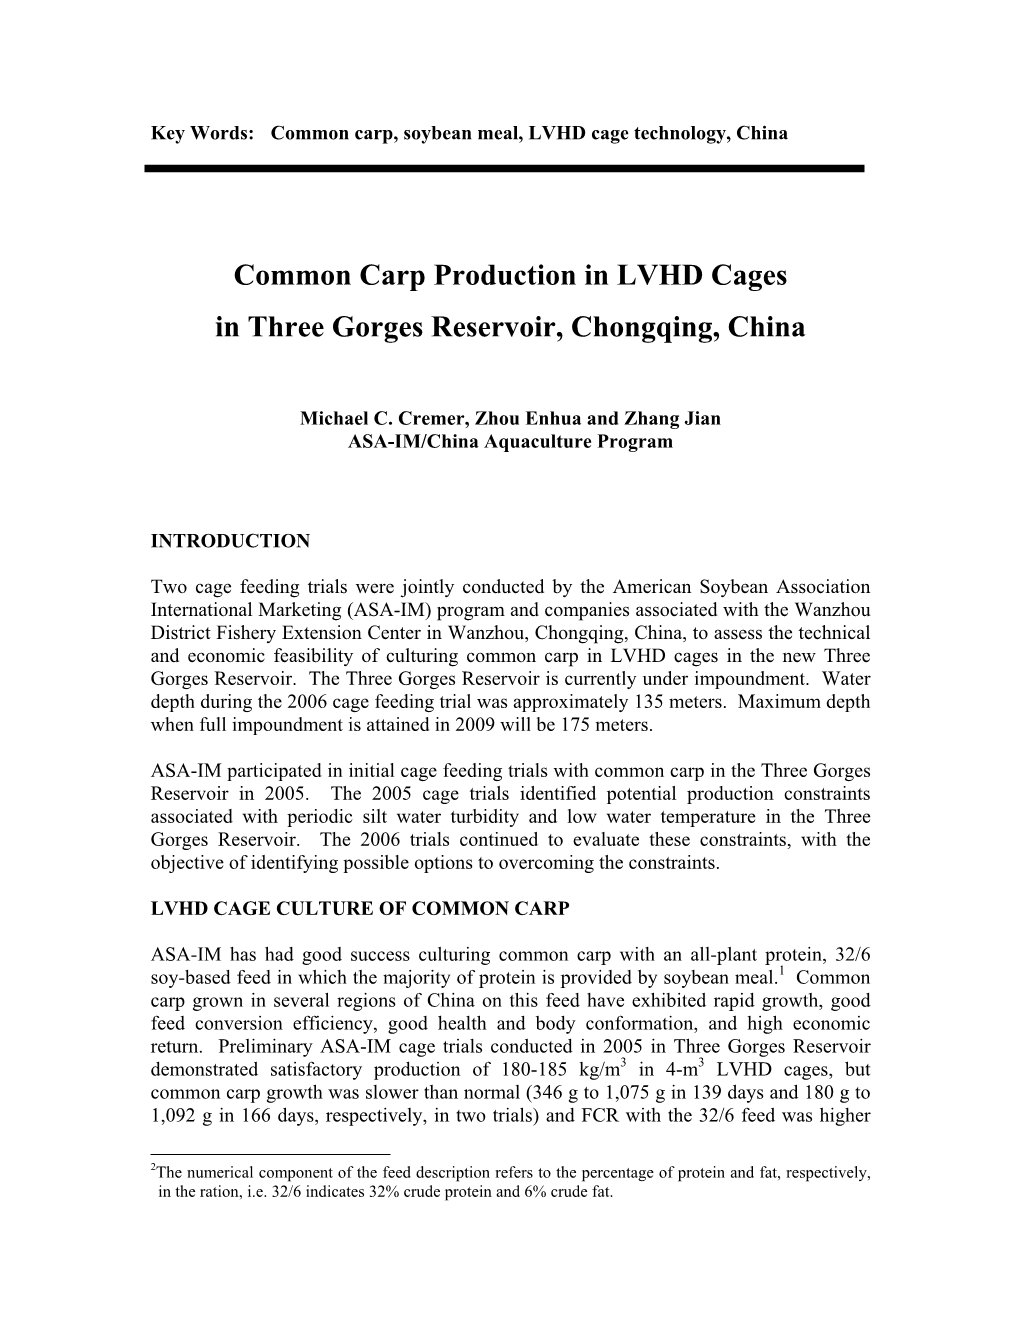 Common Carp Production in LVHD Cages in Three Gorges Reservoir, Chongqing, China